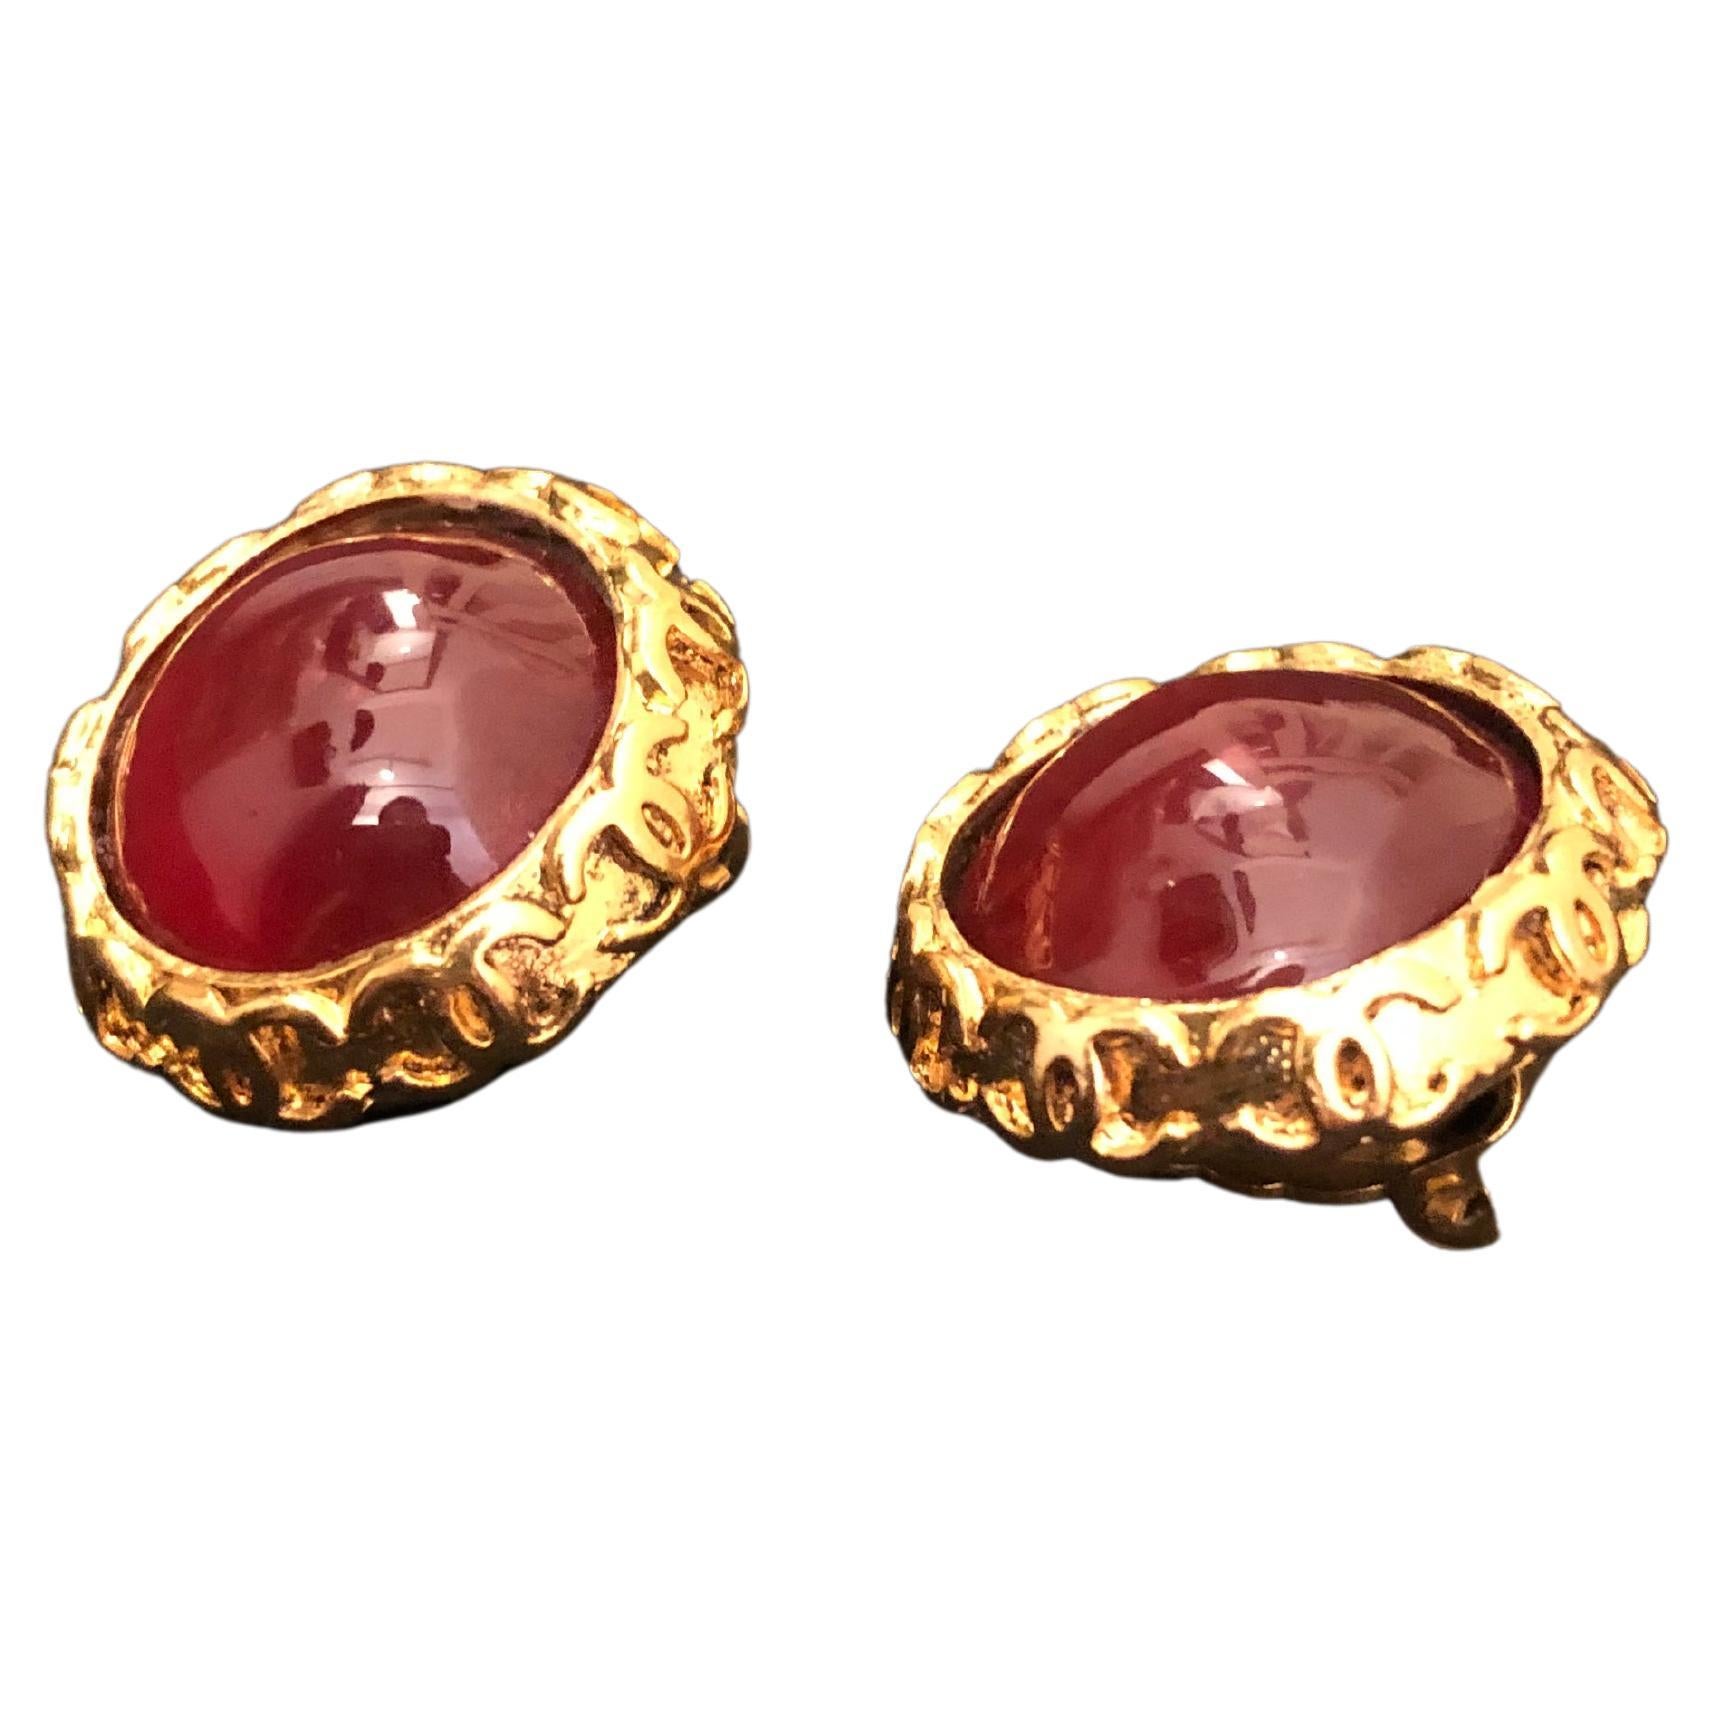 1994 Vintage CHANEL Gold Toned Red Gripoix Earclips Clip On Earrings For Sale